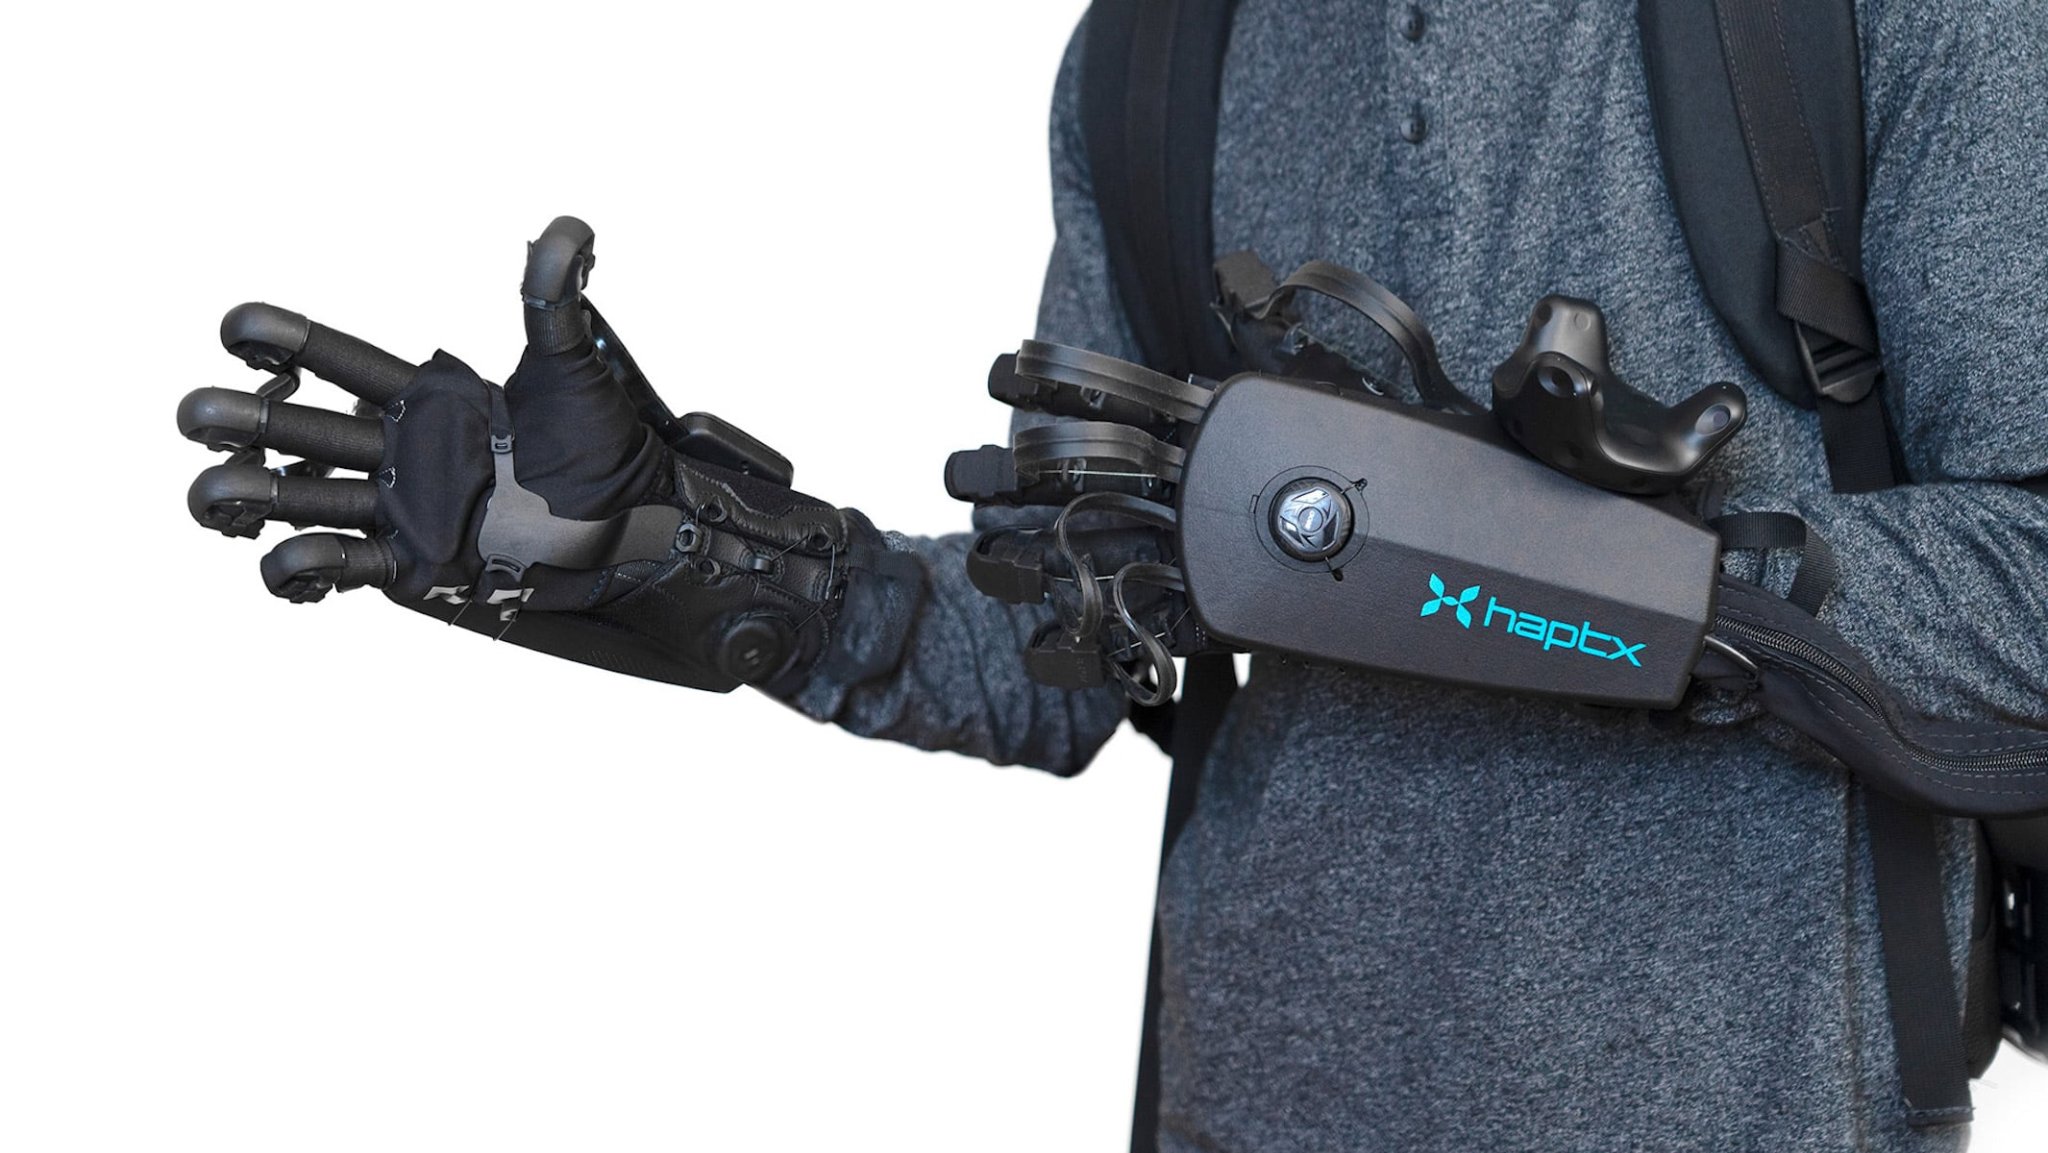 HaptX Launches new and improved DK2 Haptic VR Gloves